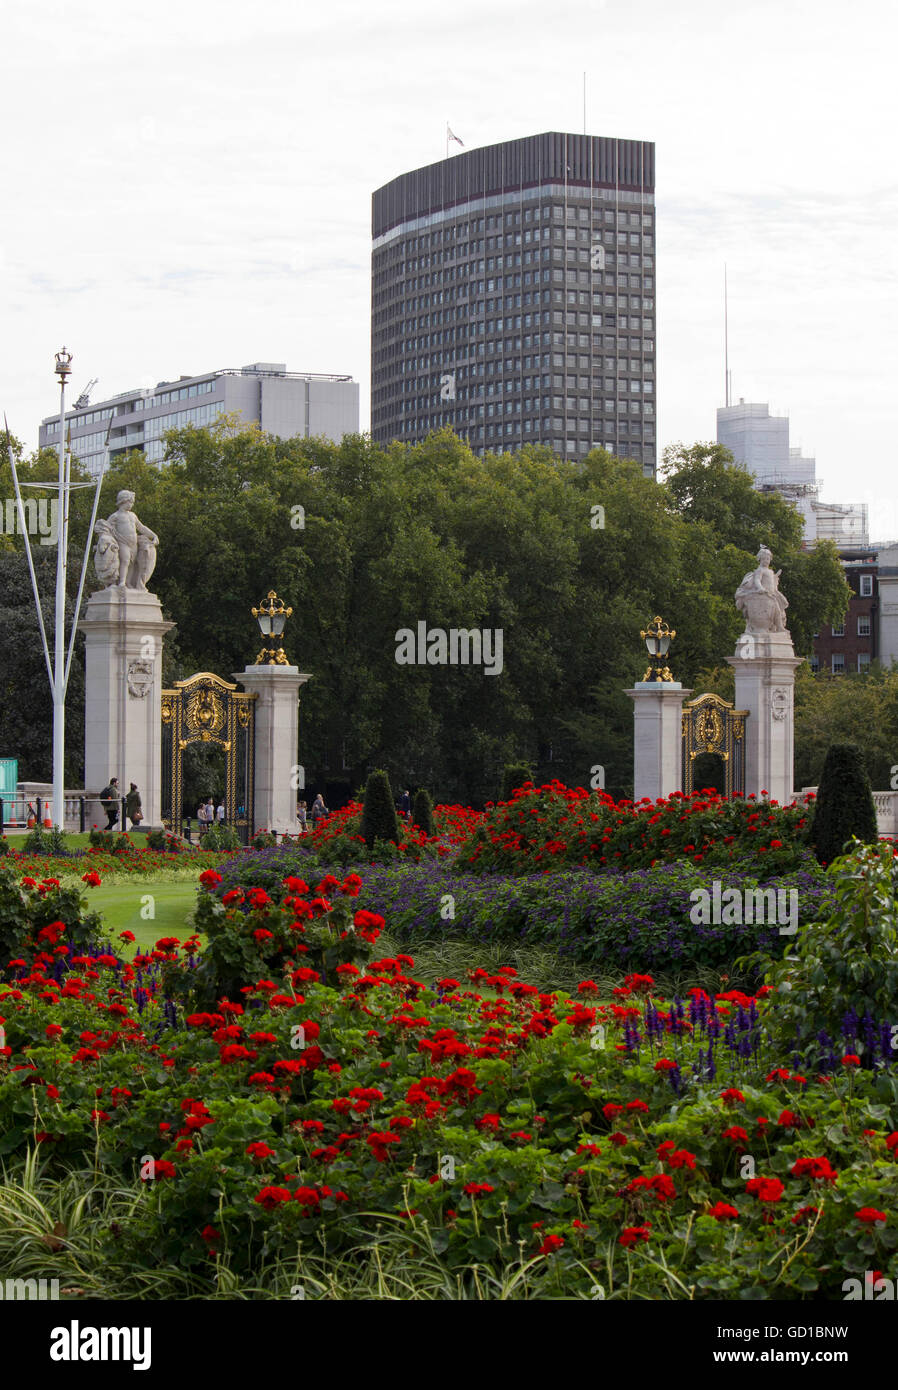 LONDON, UNITED KINGDOM - SEPTEMBER 11 2015: St.James Park entrance from the Ceremonial Australia Gate with flowers all around Stock Photo